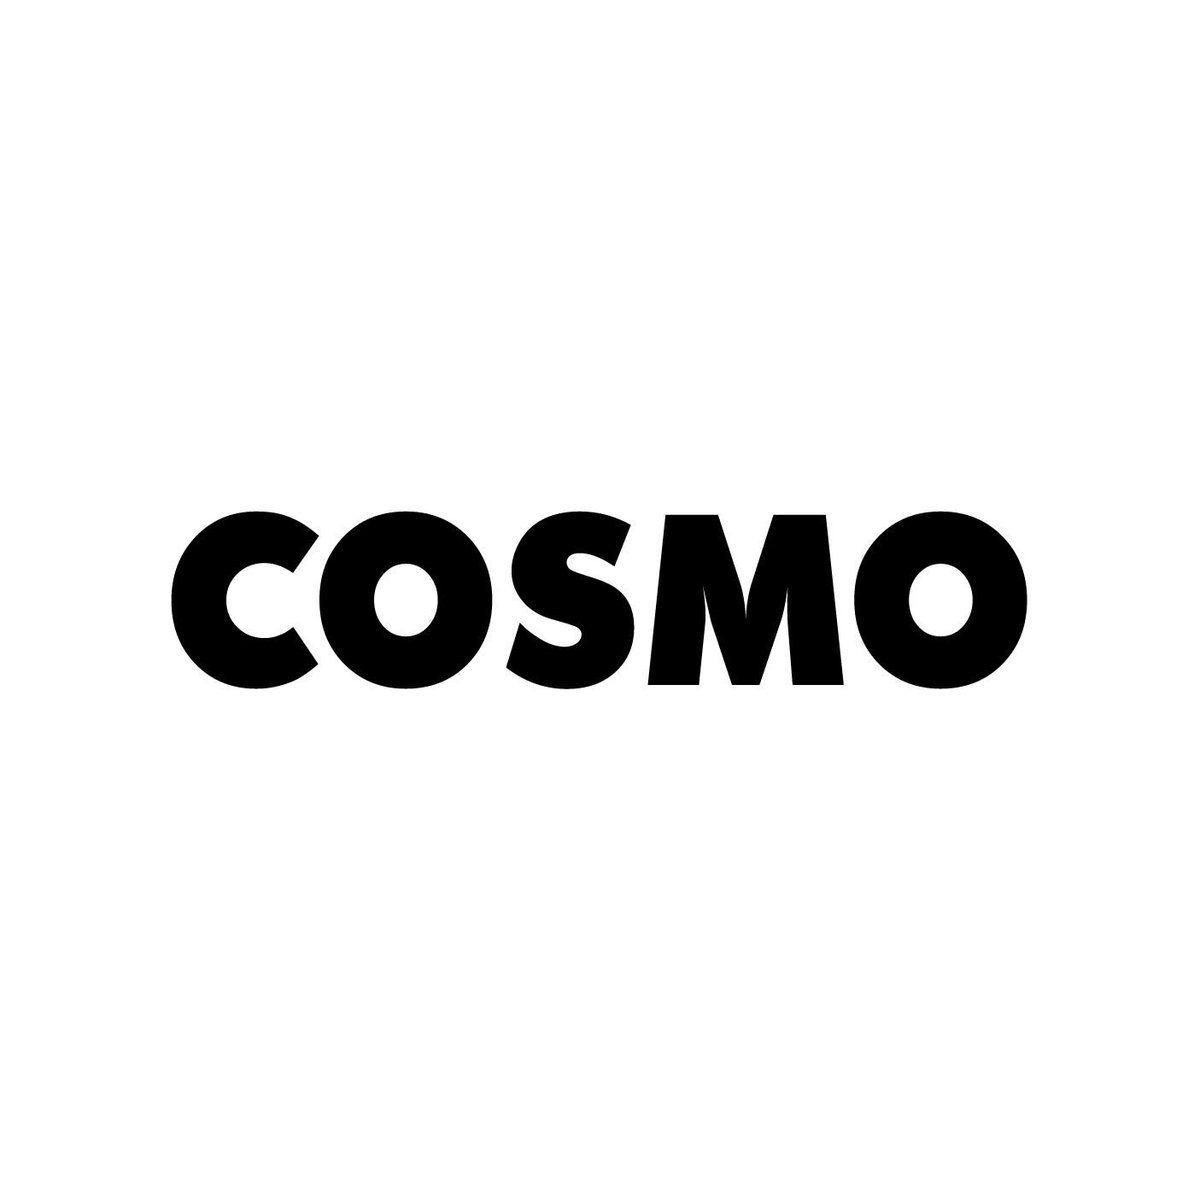 Cosmo Logo - COSMO is the new Cosmo logo. It is shorter